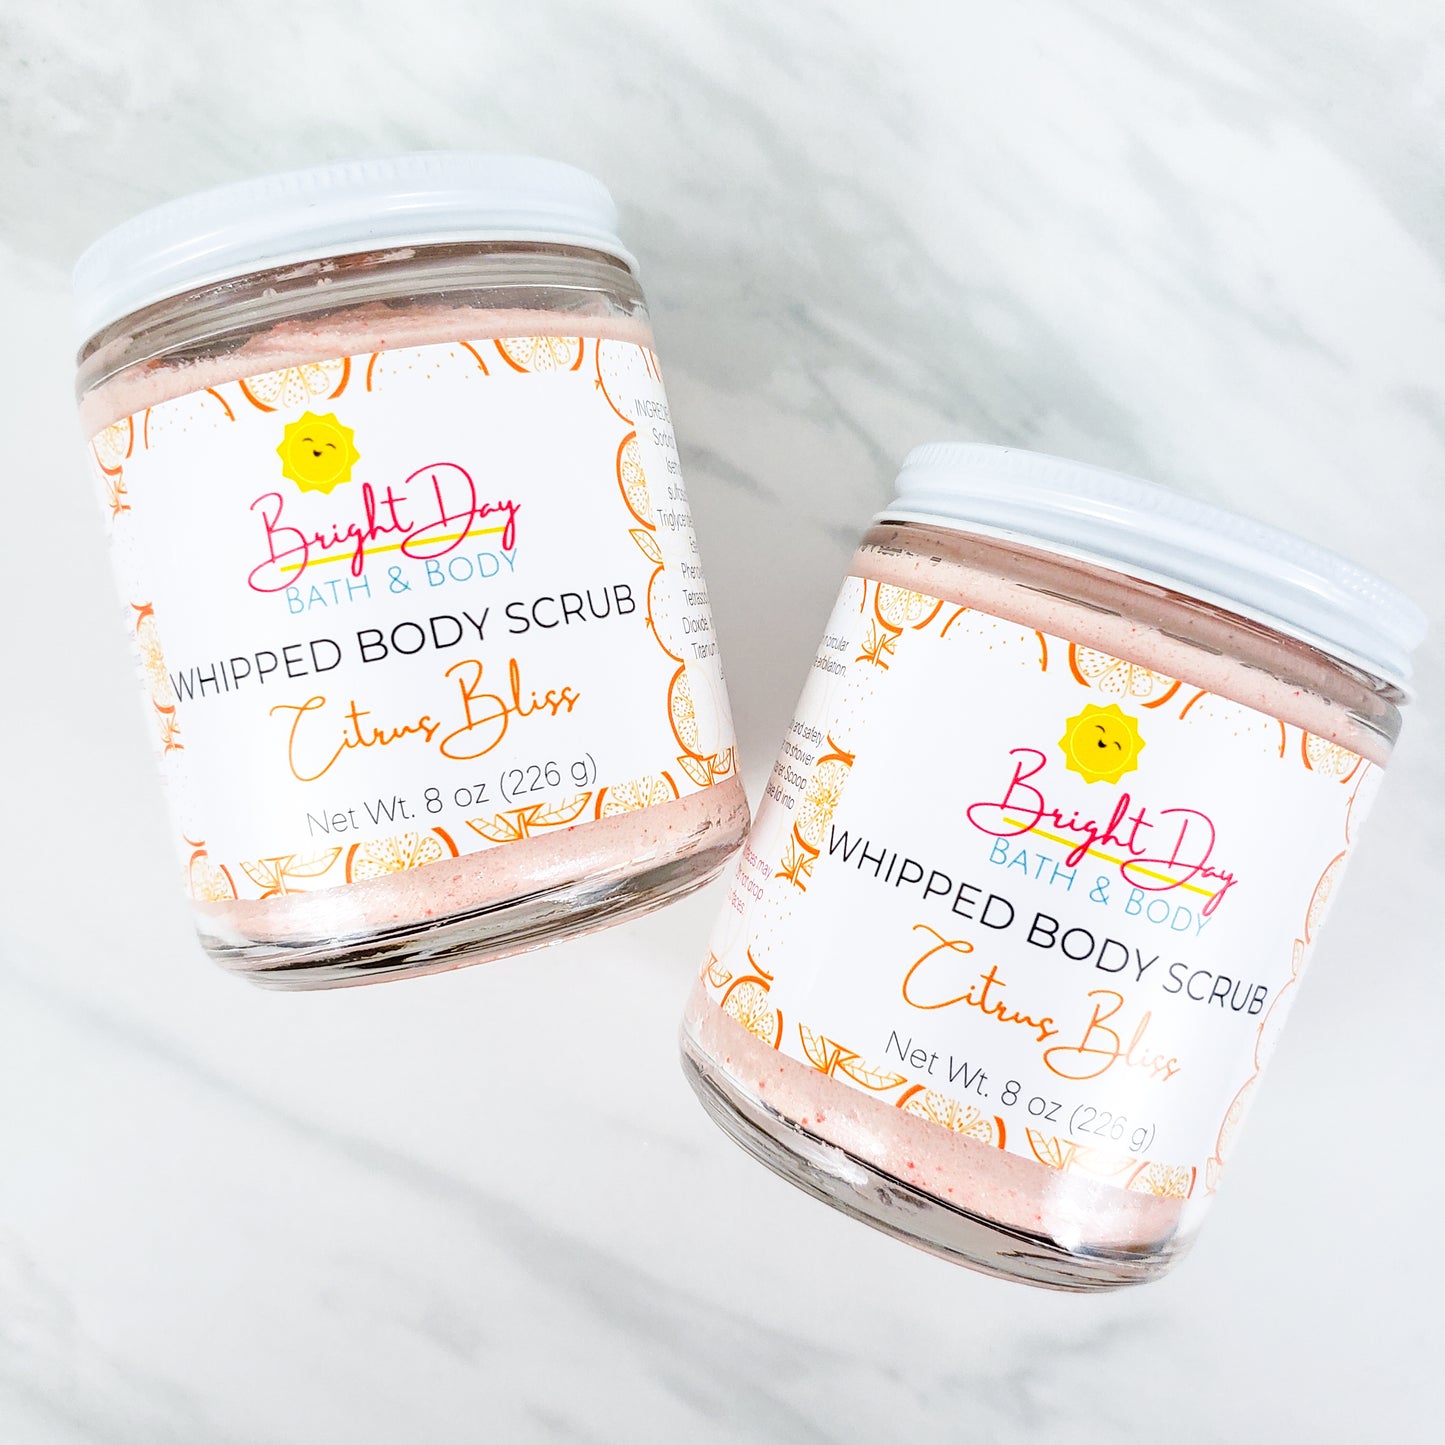 Two Citrus Bliss Body Scrubs on a tile background